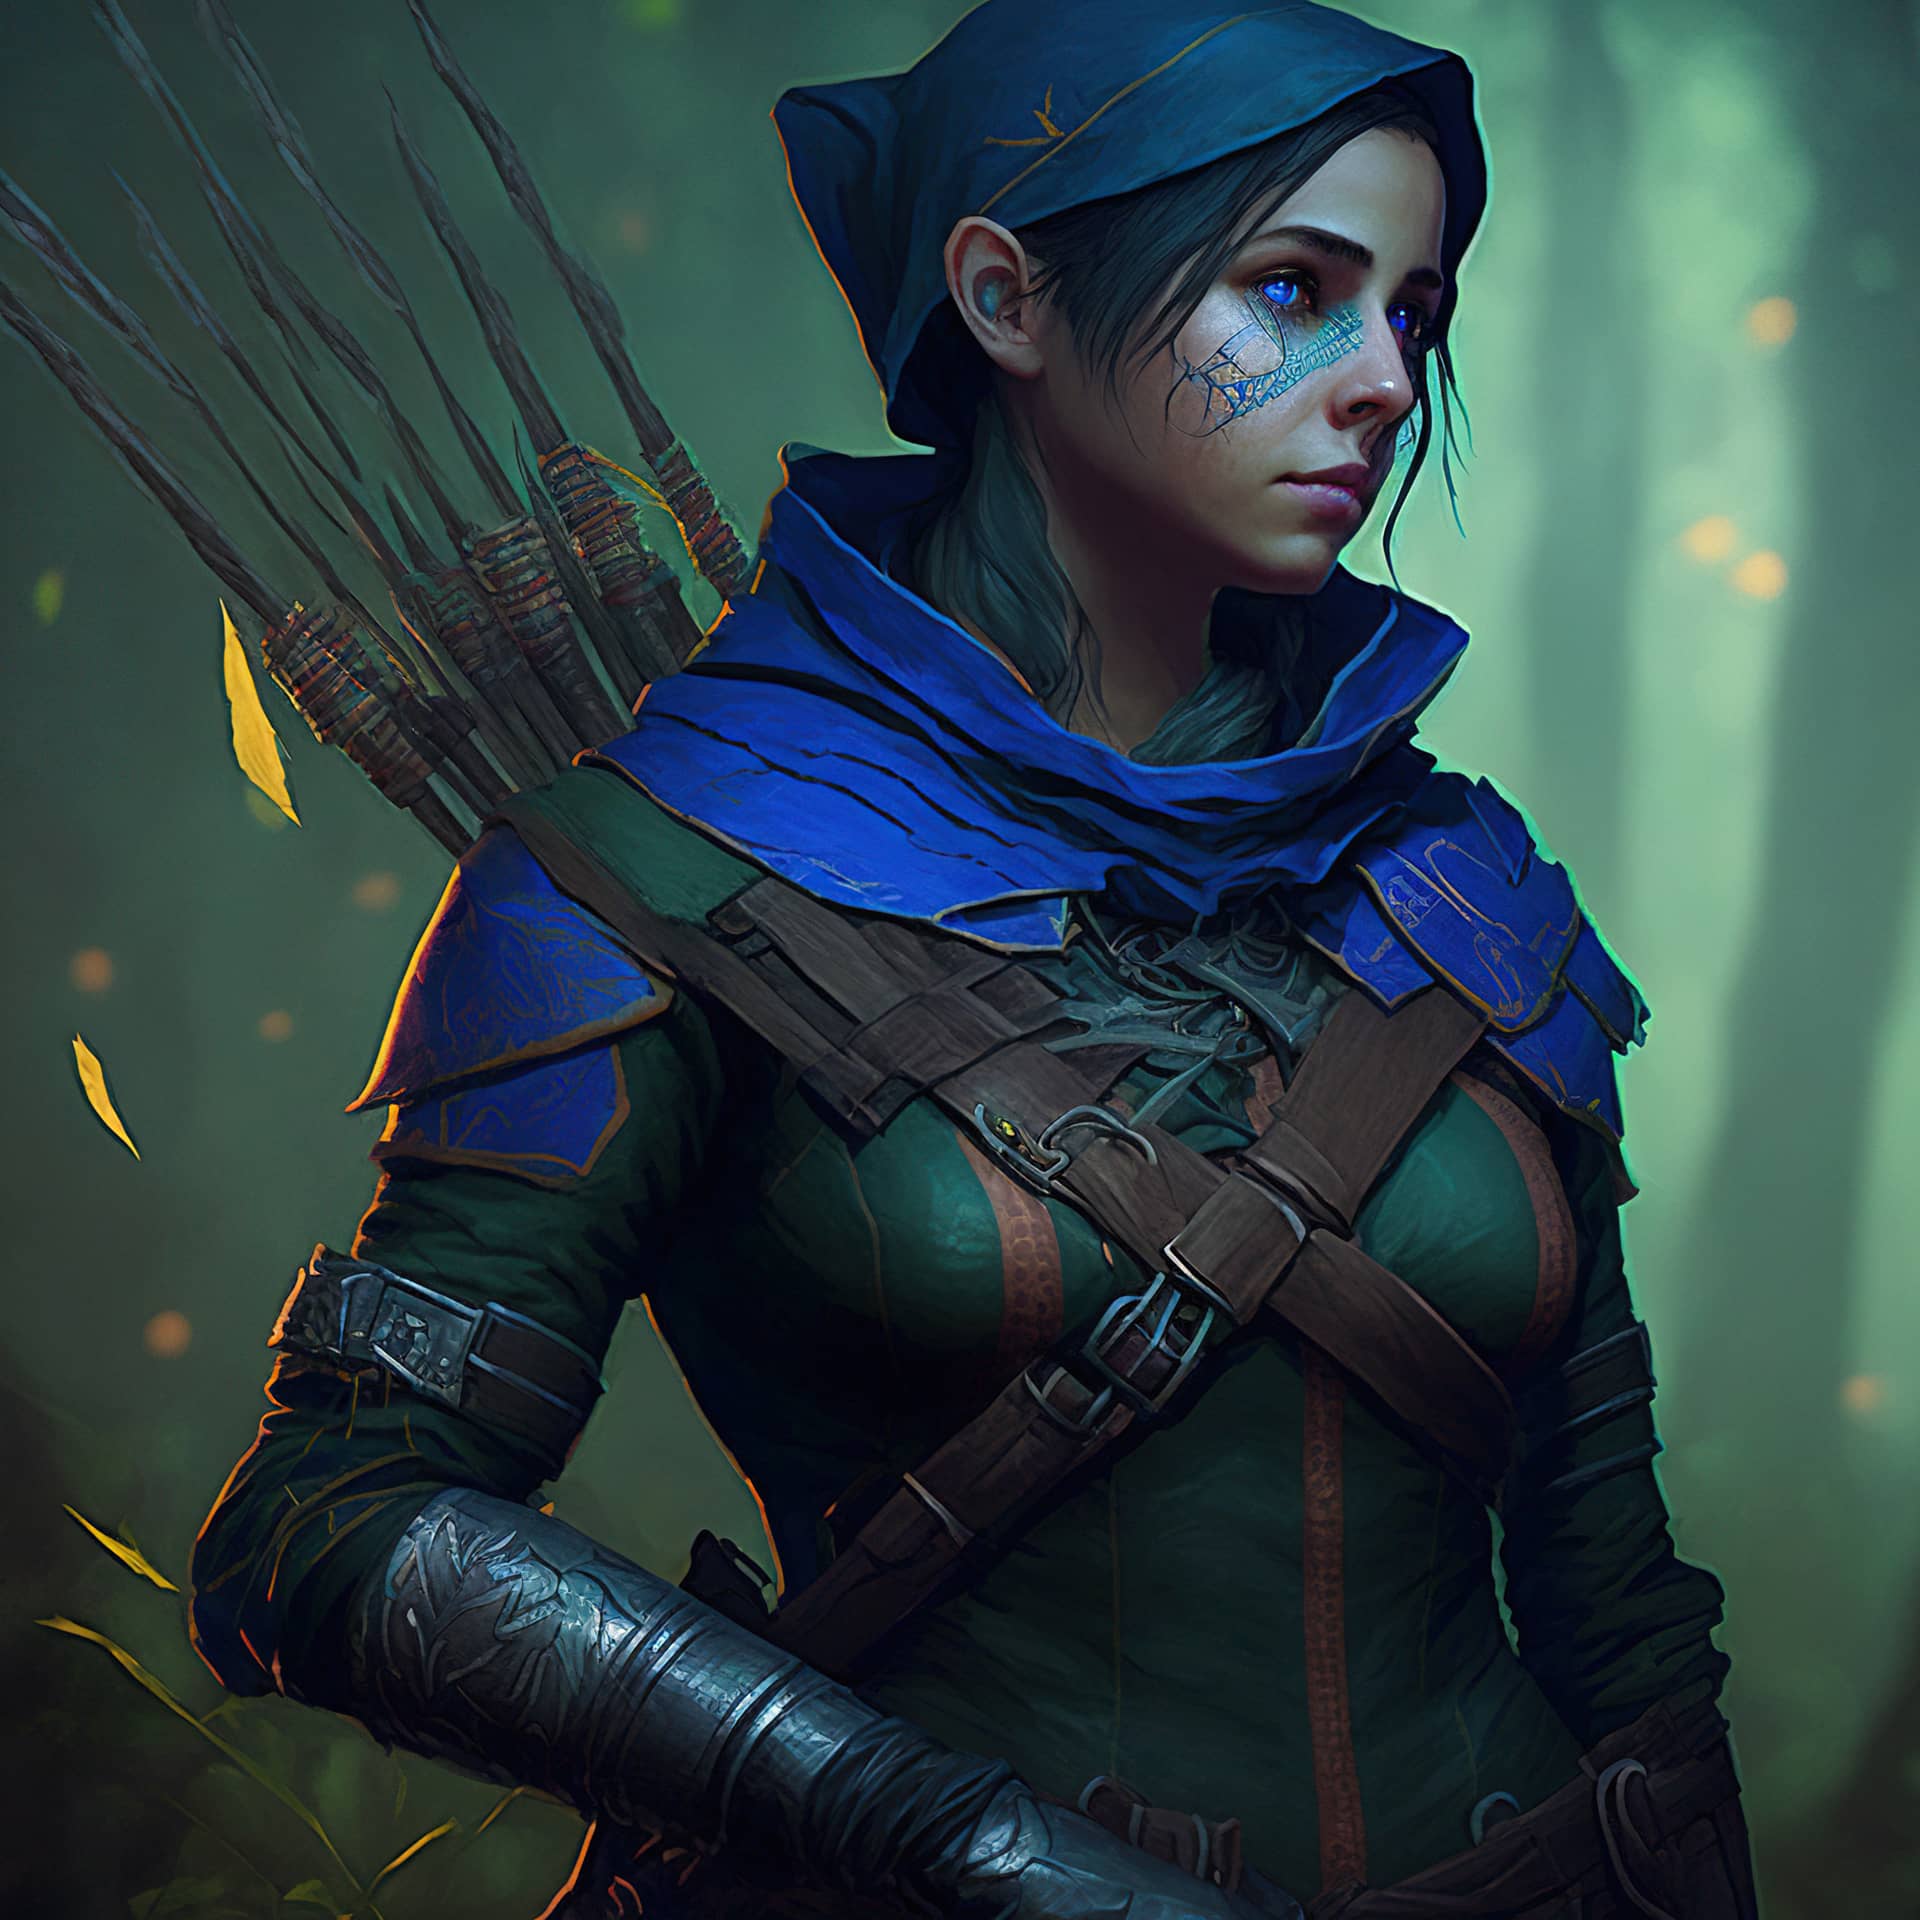 Woman hunter battlefield with bow digital art style illustration painting